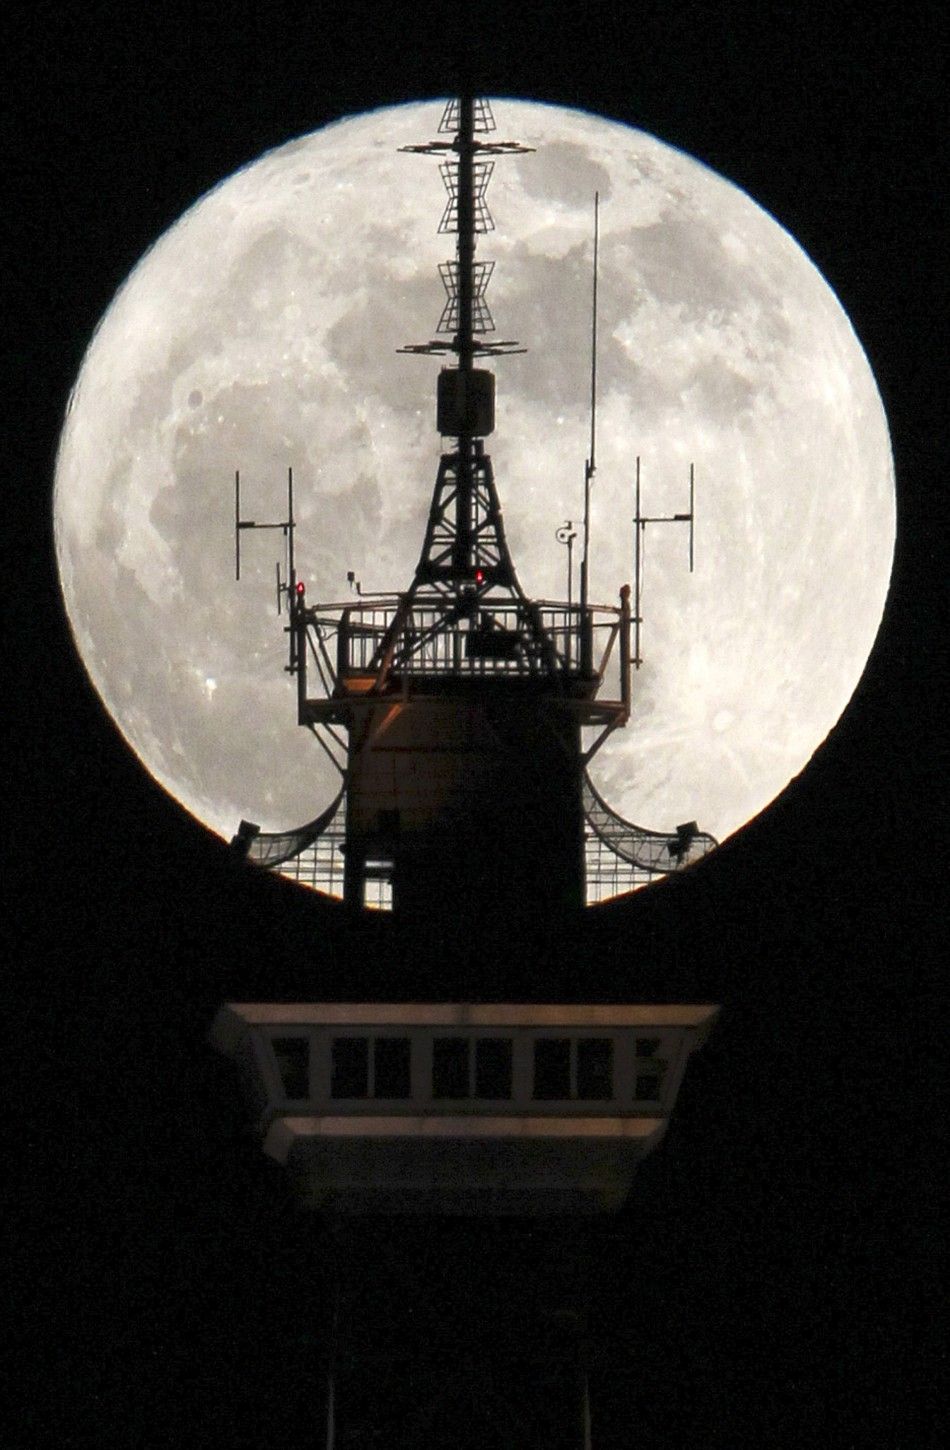 The moon is seen behind the top of the radio and television tower Funkturm in Berlin